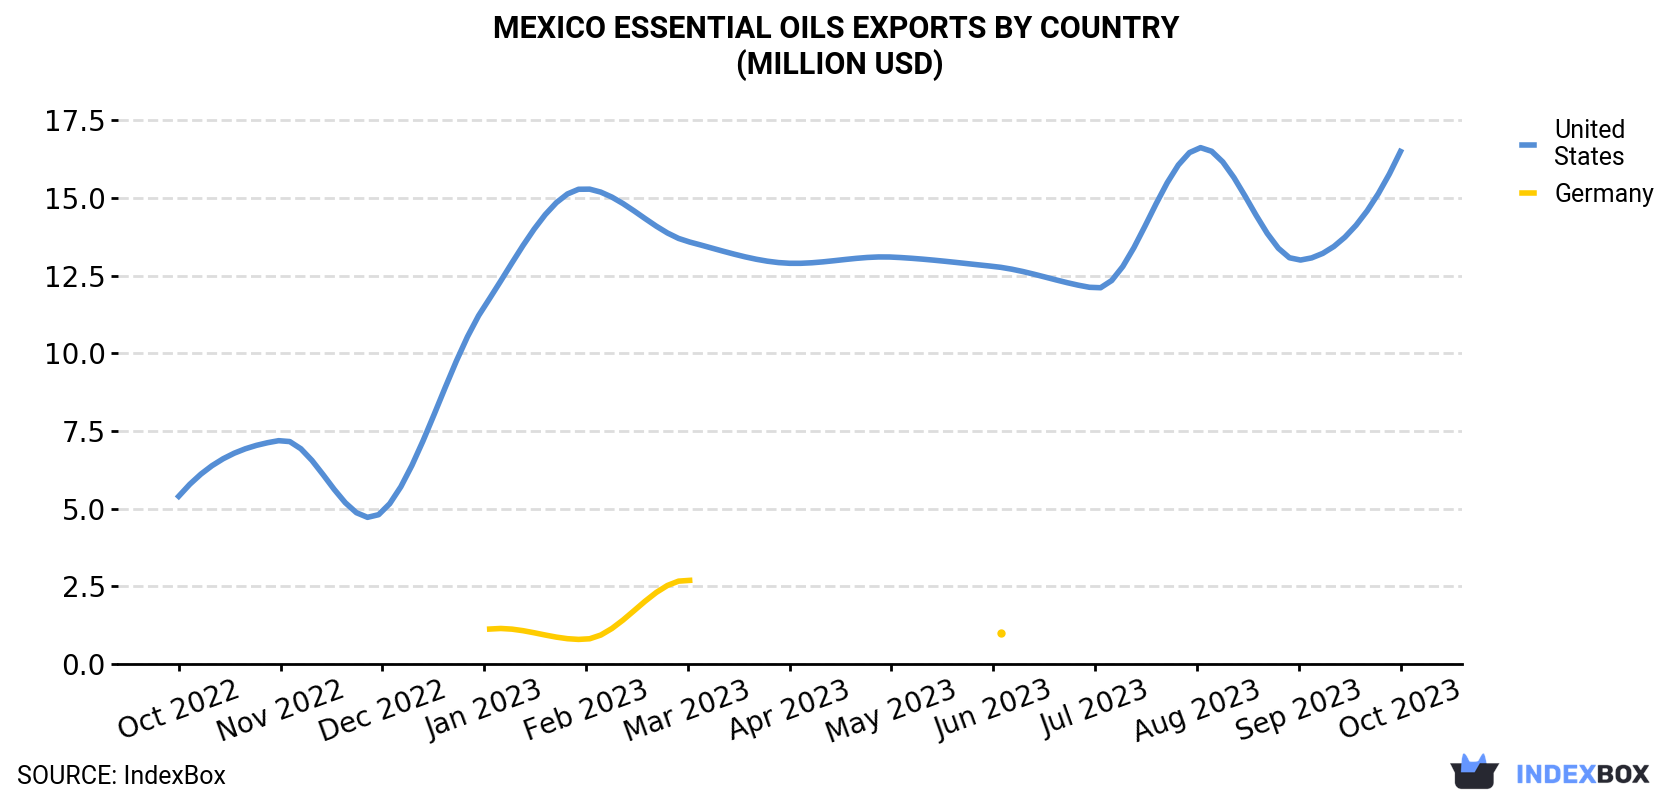 Mexico Essential Oils Exports By Country (Million USD)